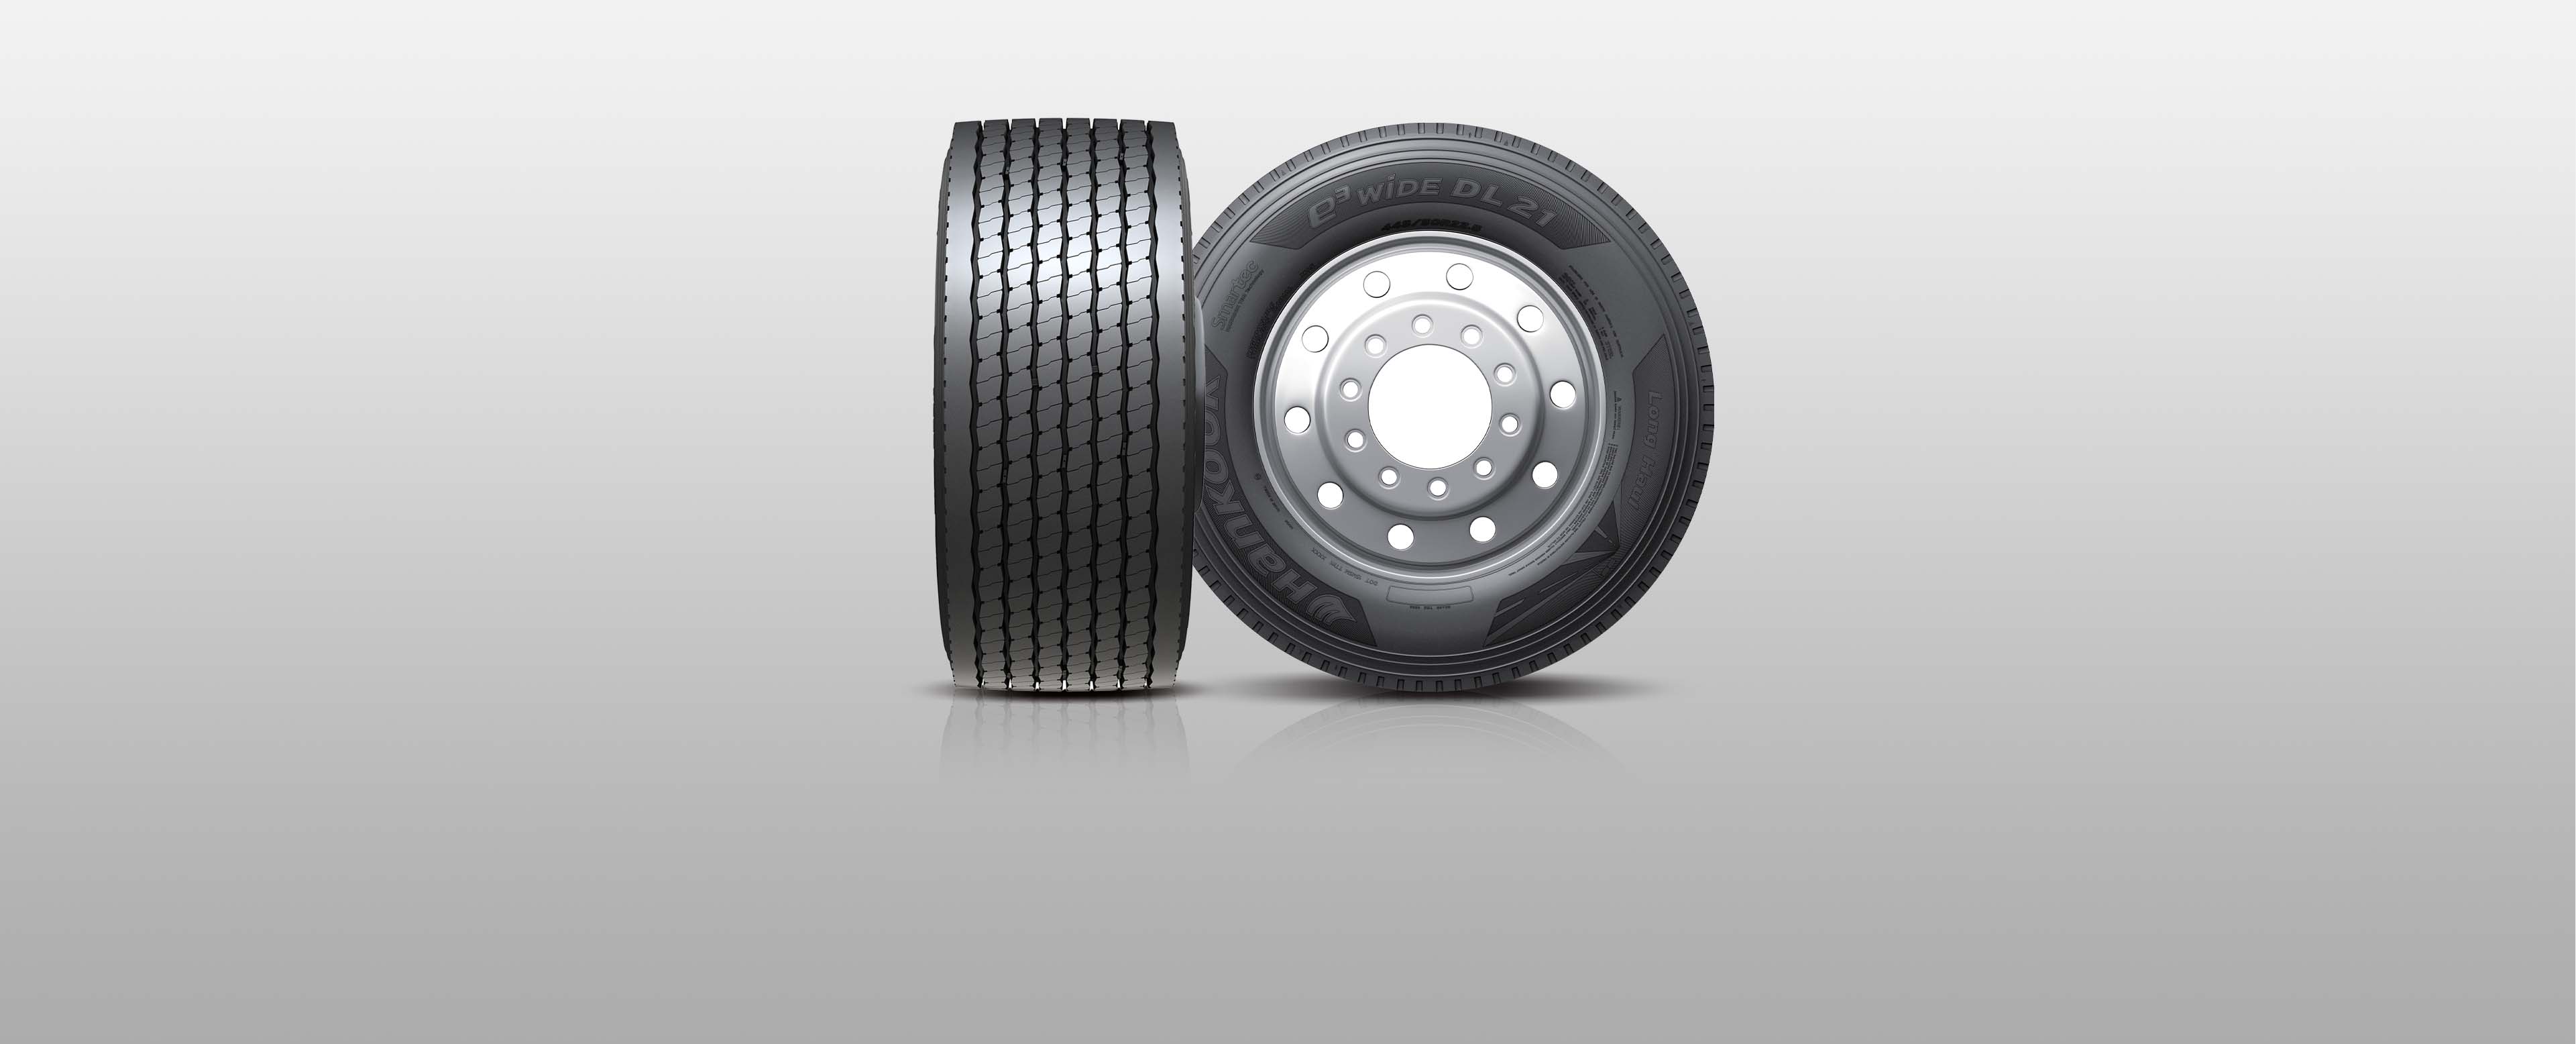 Hankook Tire & Technology-Tires-Smart-Smart e3 Wide-DL21-Long Haul Wide Base Drive Tire with Long Mileage and Fuel Efficiency